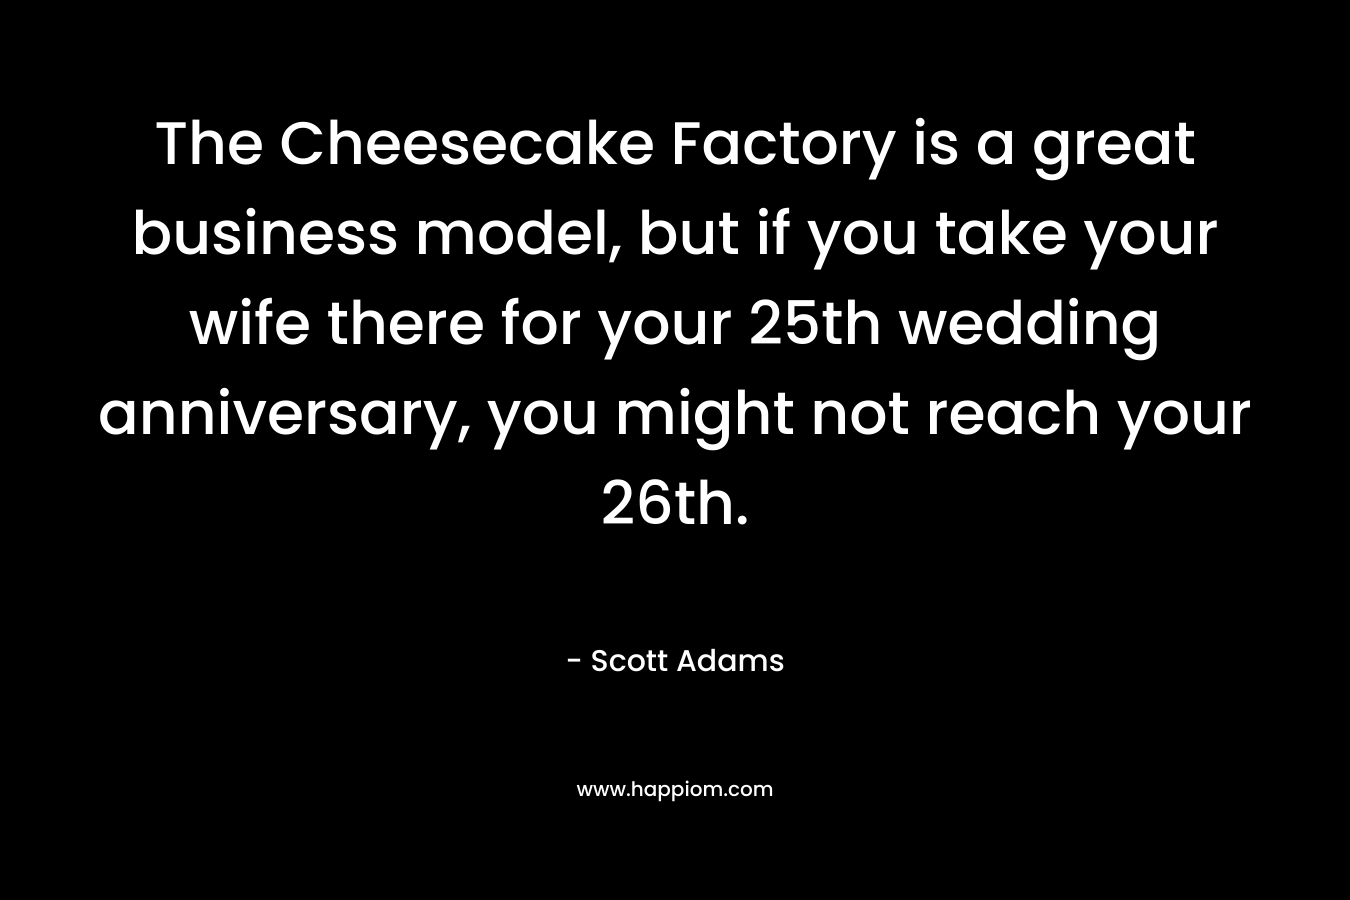 The Cheesecake Factory is a great business model, but if you take your wife there for your 25th wedding anniversary, you might not reach your 26th. – Scott Adams